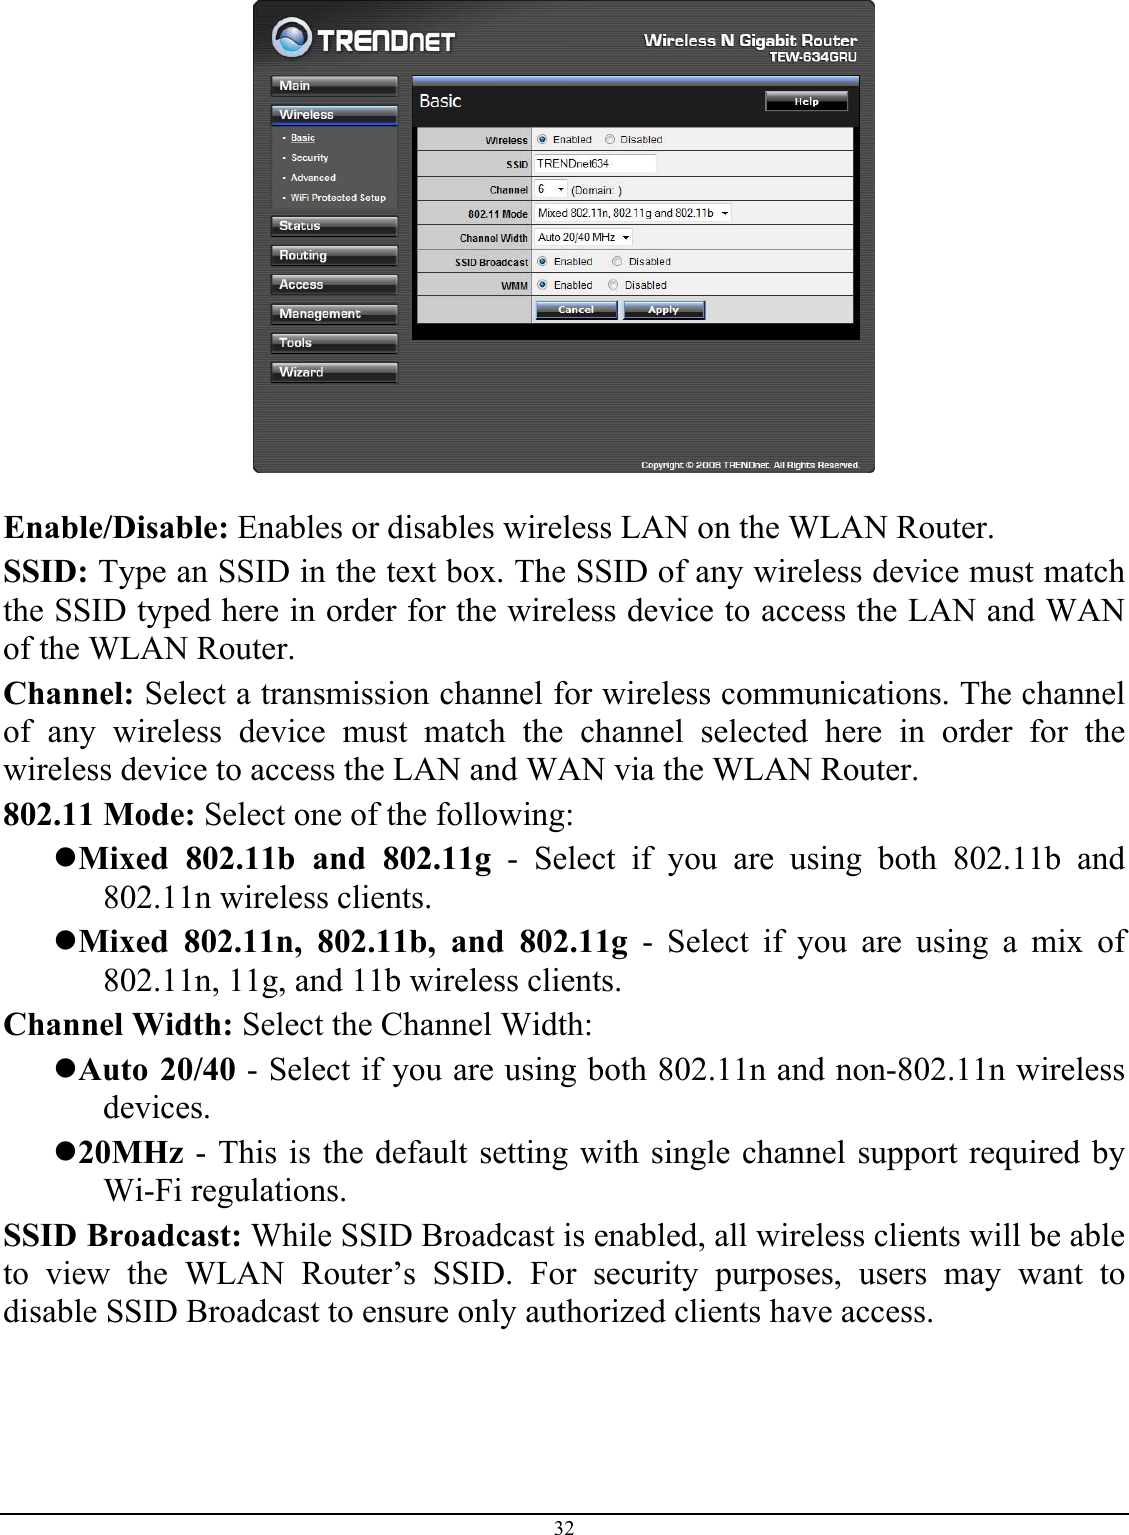 32    Enable/Disable: Enables or disables wireless LAN on the WLAN Router. SSID: Type an SSID in the text box. The SSID of any wireless device must match the SSID typed here in order for the wireless device to access the LAN and WAN of the WLAN Router. Channel: Select a transmission channel for wireless communications. The channel of any wireless device must match the channel selected here in order for the wireless device to access the LAN and WAN via the WLAN Router. 802.11 Mode: Select one of the following: z Mixed 802.11b and 802.11g - Select if you are using both 802.11b and 802.11n wireless clients. z Mixed 802.11n, 802.11b, and 802.11g - Select if you are using a mix of 802.11n, 11g, and 11b wireless clients. Channel Width: Select the Channel Width: z Auto 20/40 - Select if you are using both 802.11n and non-802.11n wireless devices. z 20MHz - This is the default setting with single channel support required by Wi-Fi regulations.  SSID Broadcast: While SSID Broadcast is enabled, all wireless clients will be able to view the WLAN Router’s SSID. For security purposes, users may want to disable SSID Broadcast to ensure only authorized clients have access.   